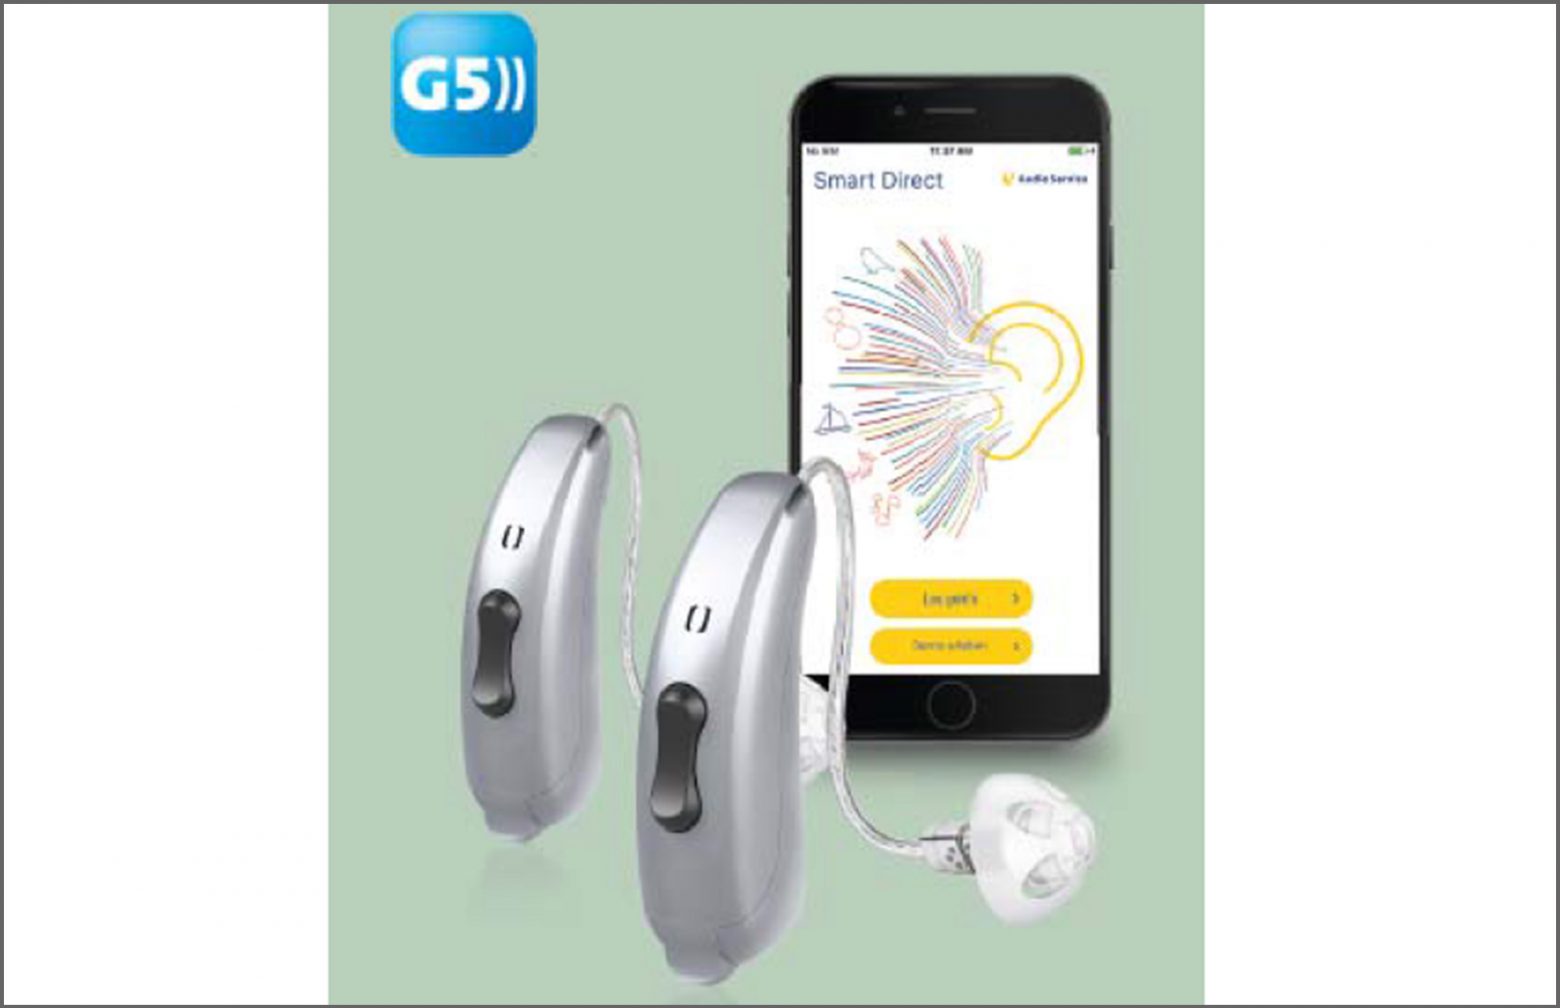 Audio Service hearing aids with Smartphone in the background